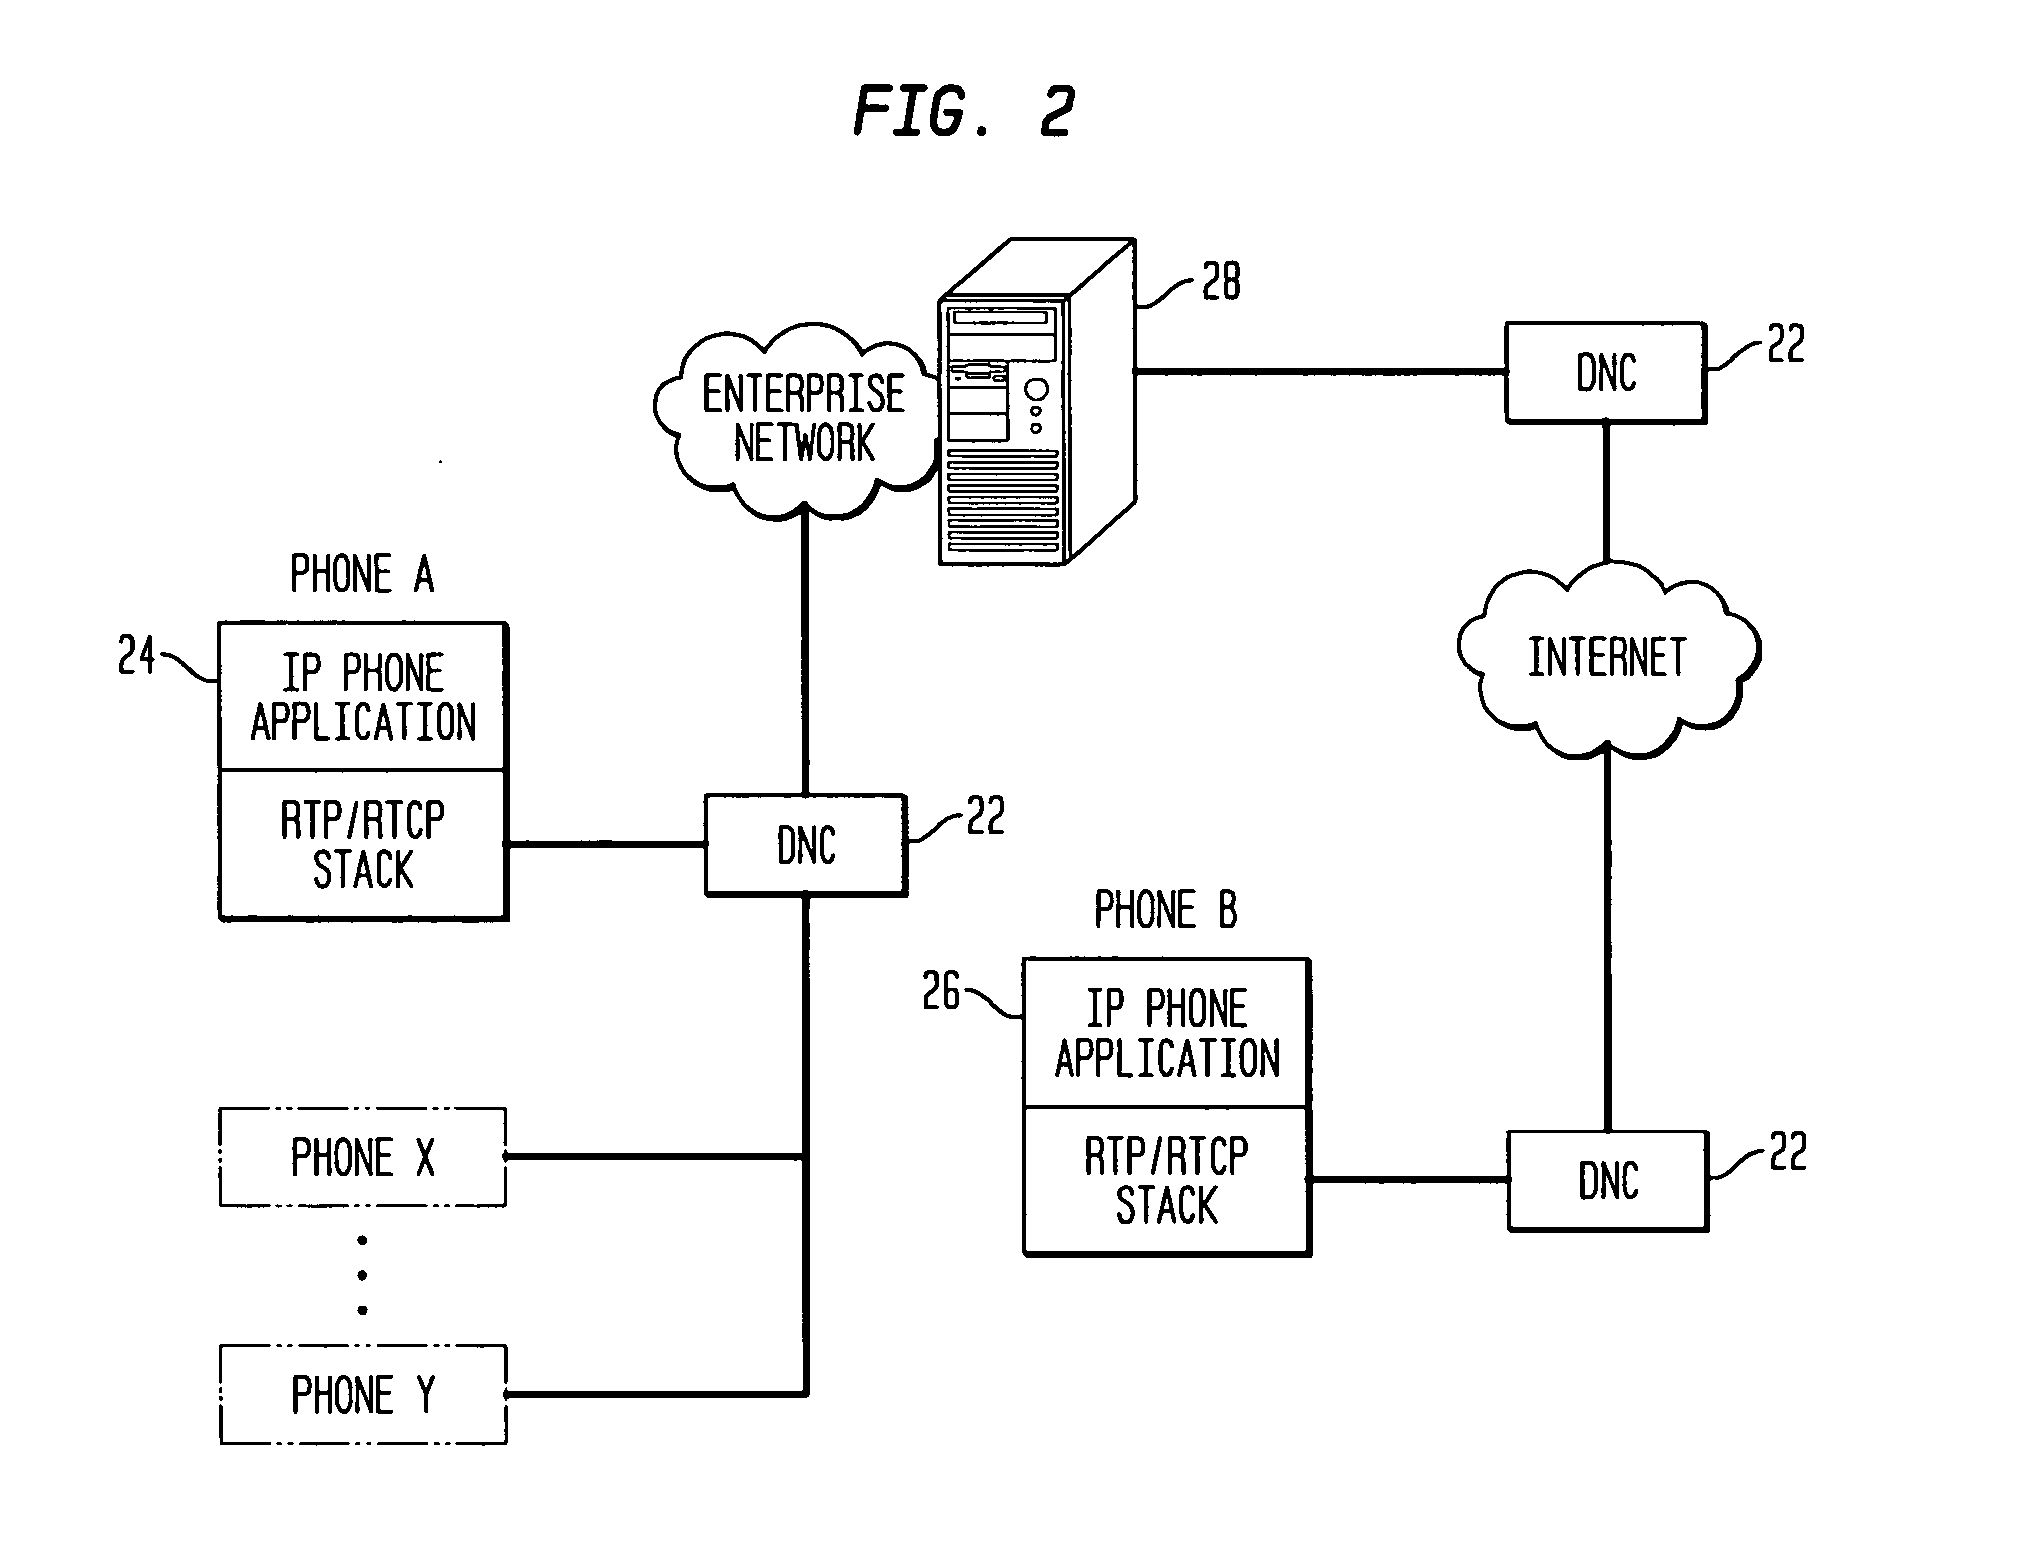 System and method for notification of internet users about faults detected on an IP network